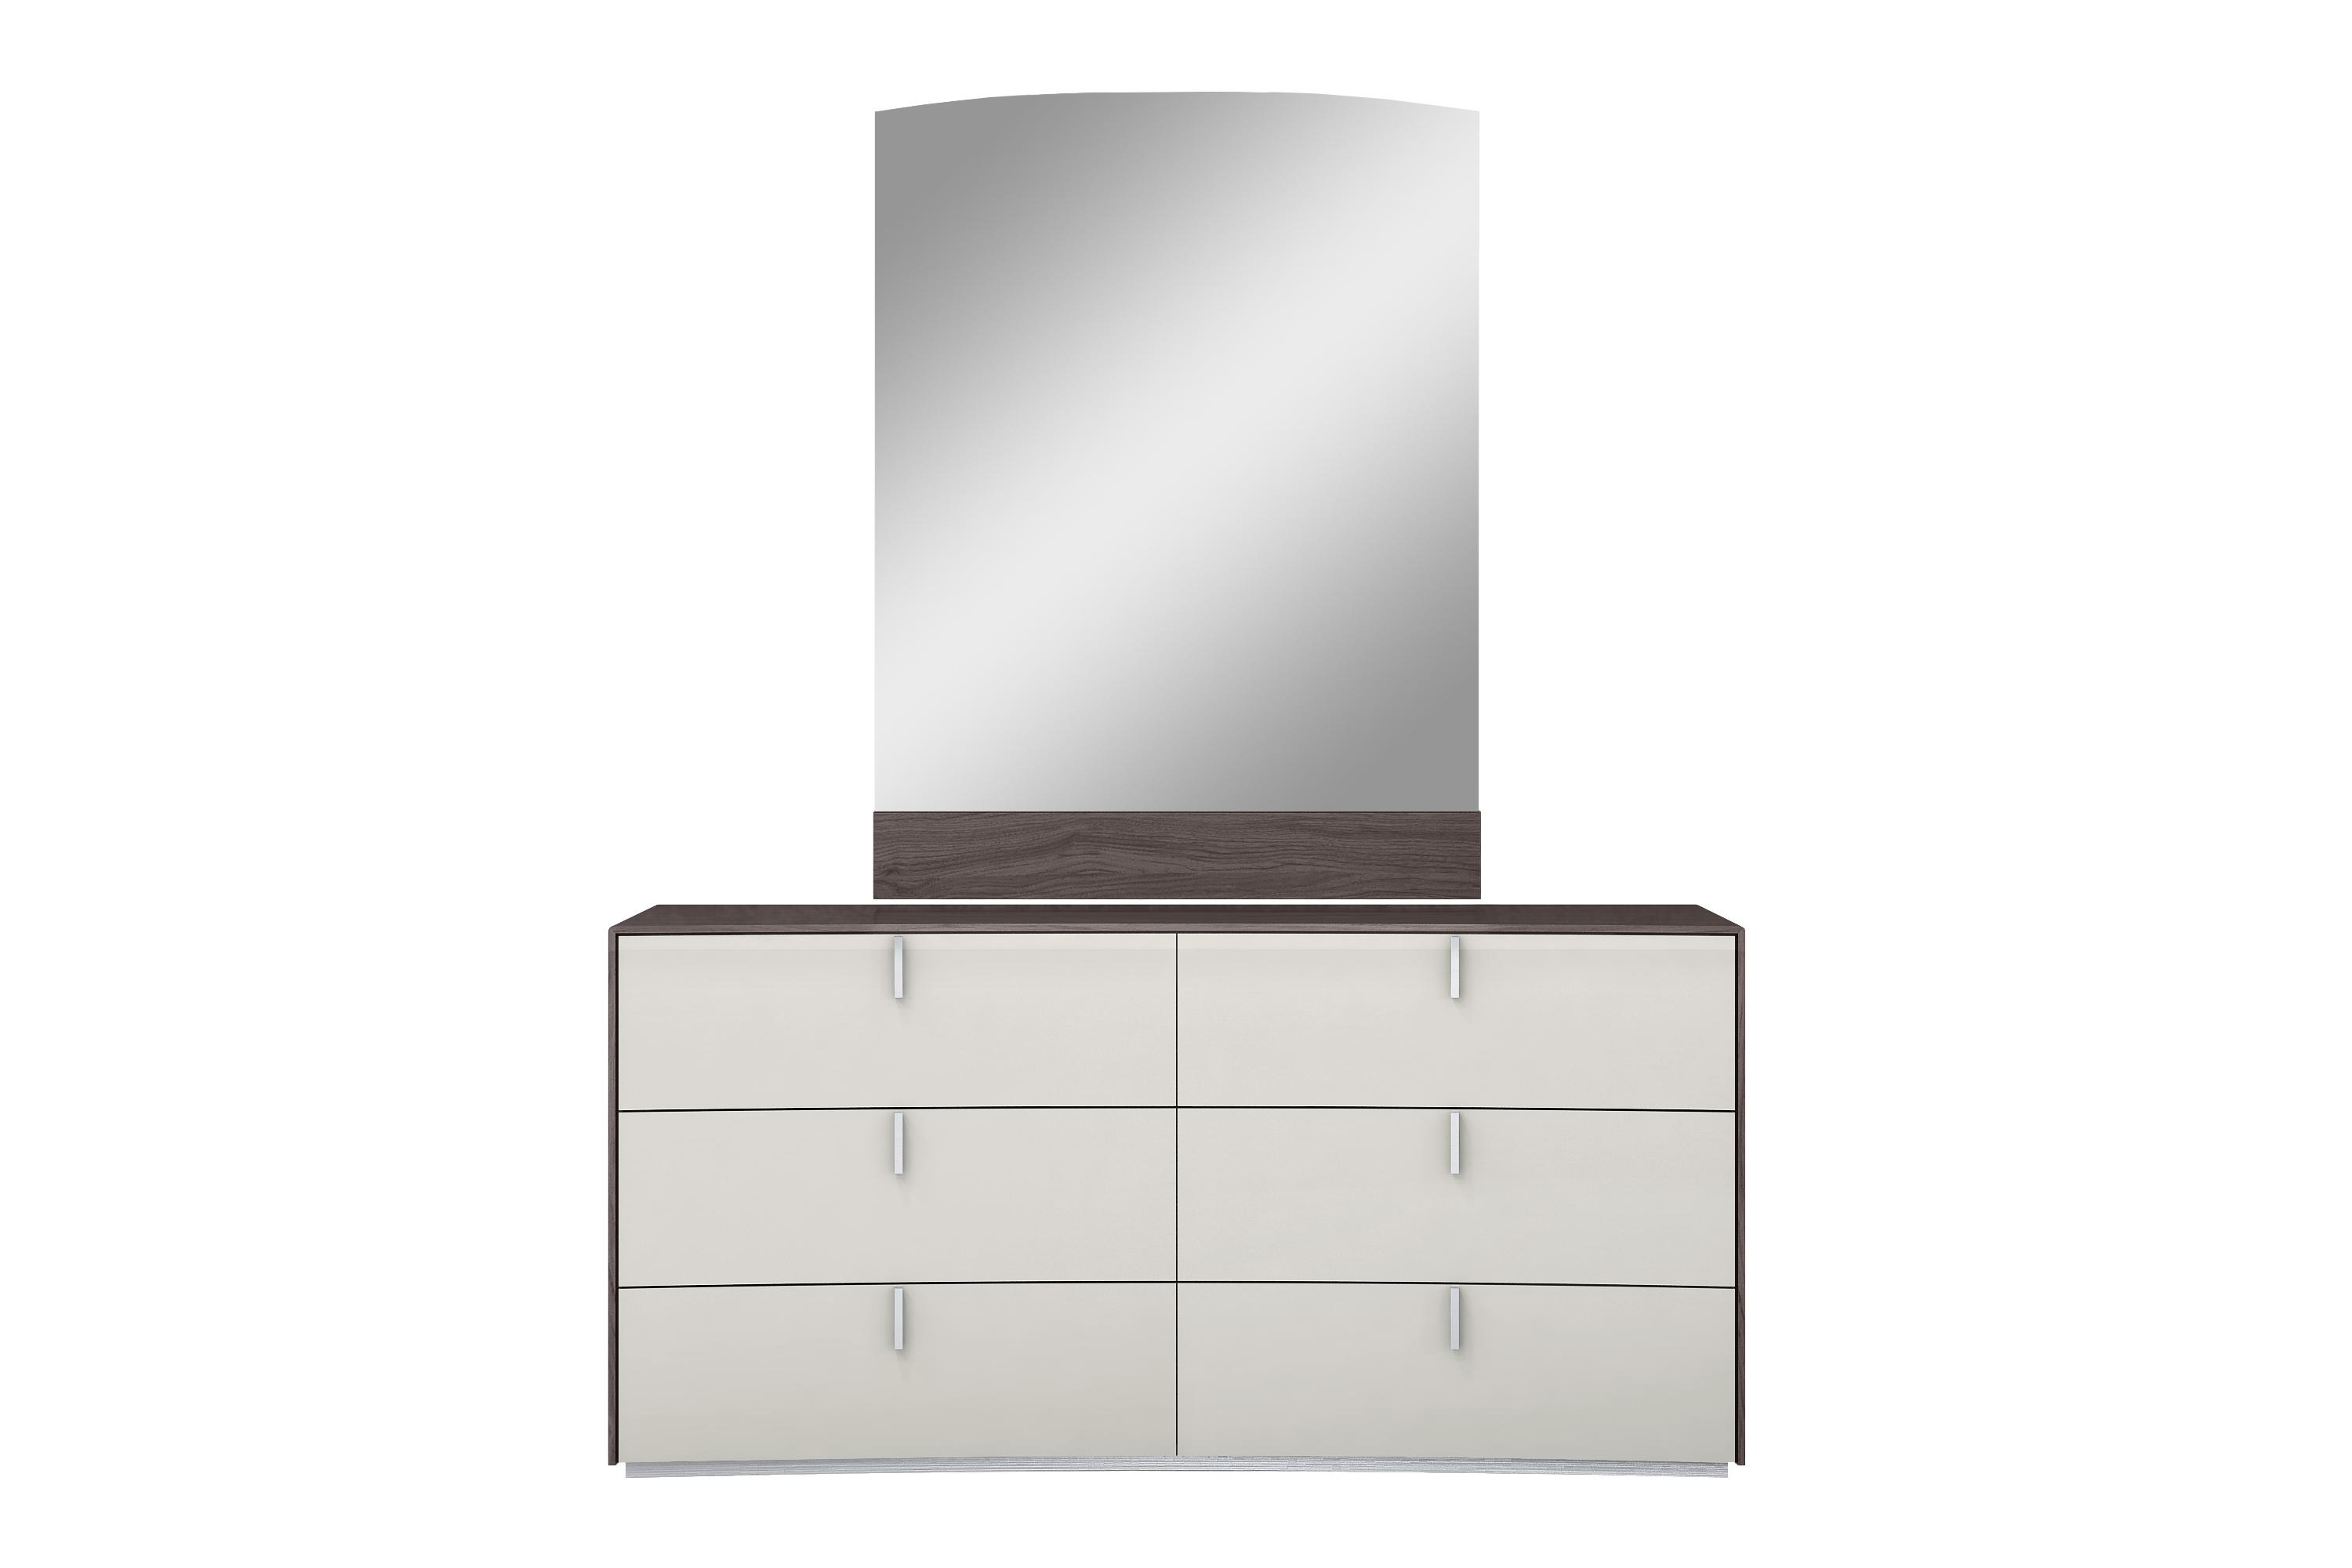 

    
Contemporary Chestnut Finish Solid Wood Dresser w/Mirror DR1754-GRY/LGRY Berlin
